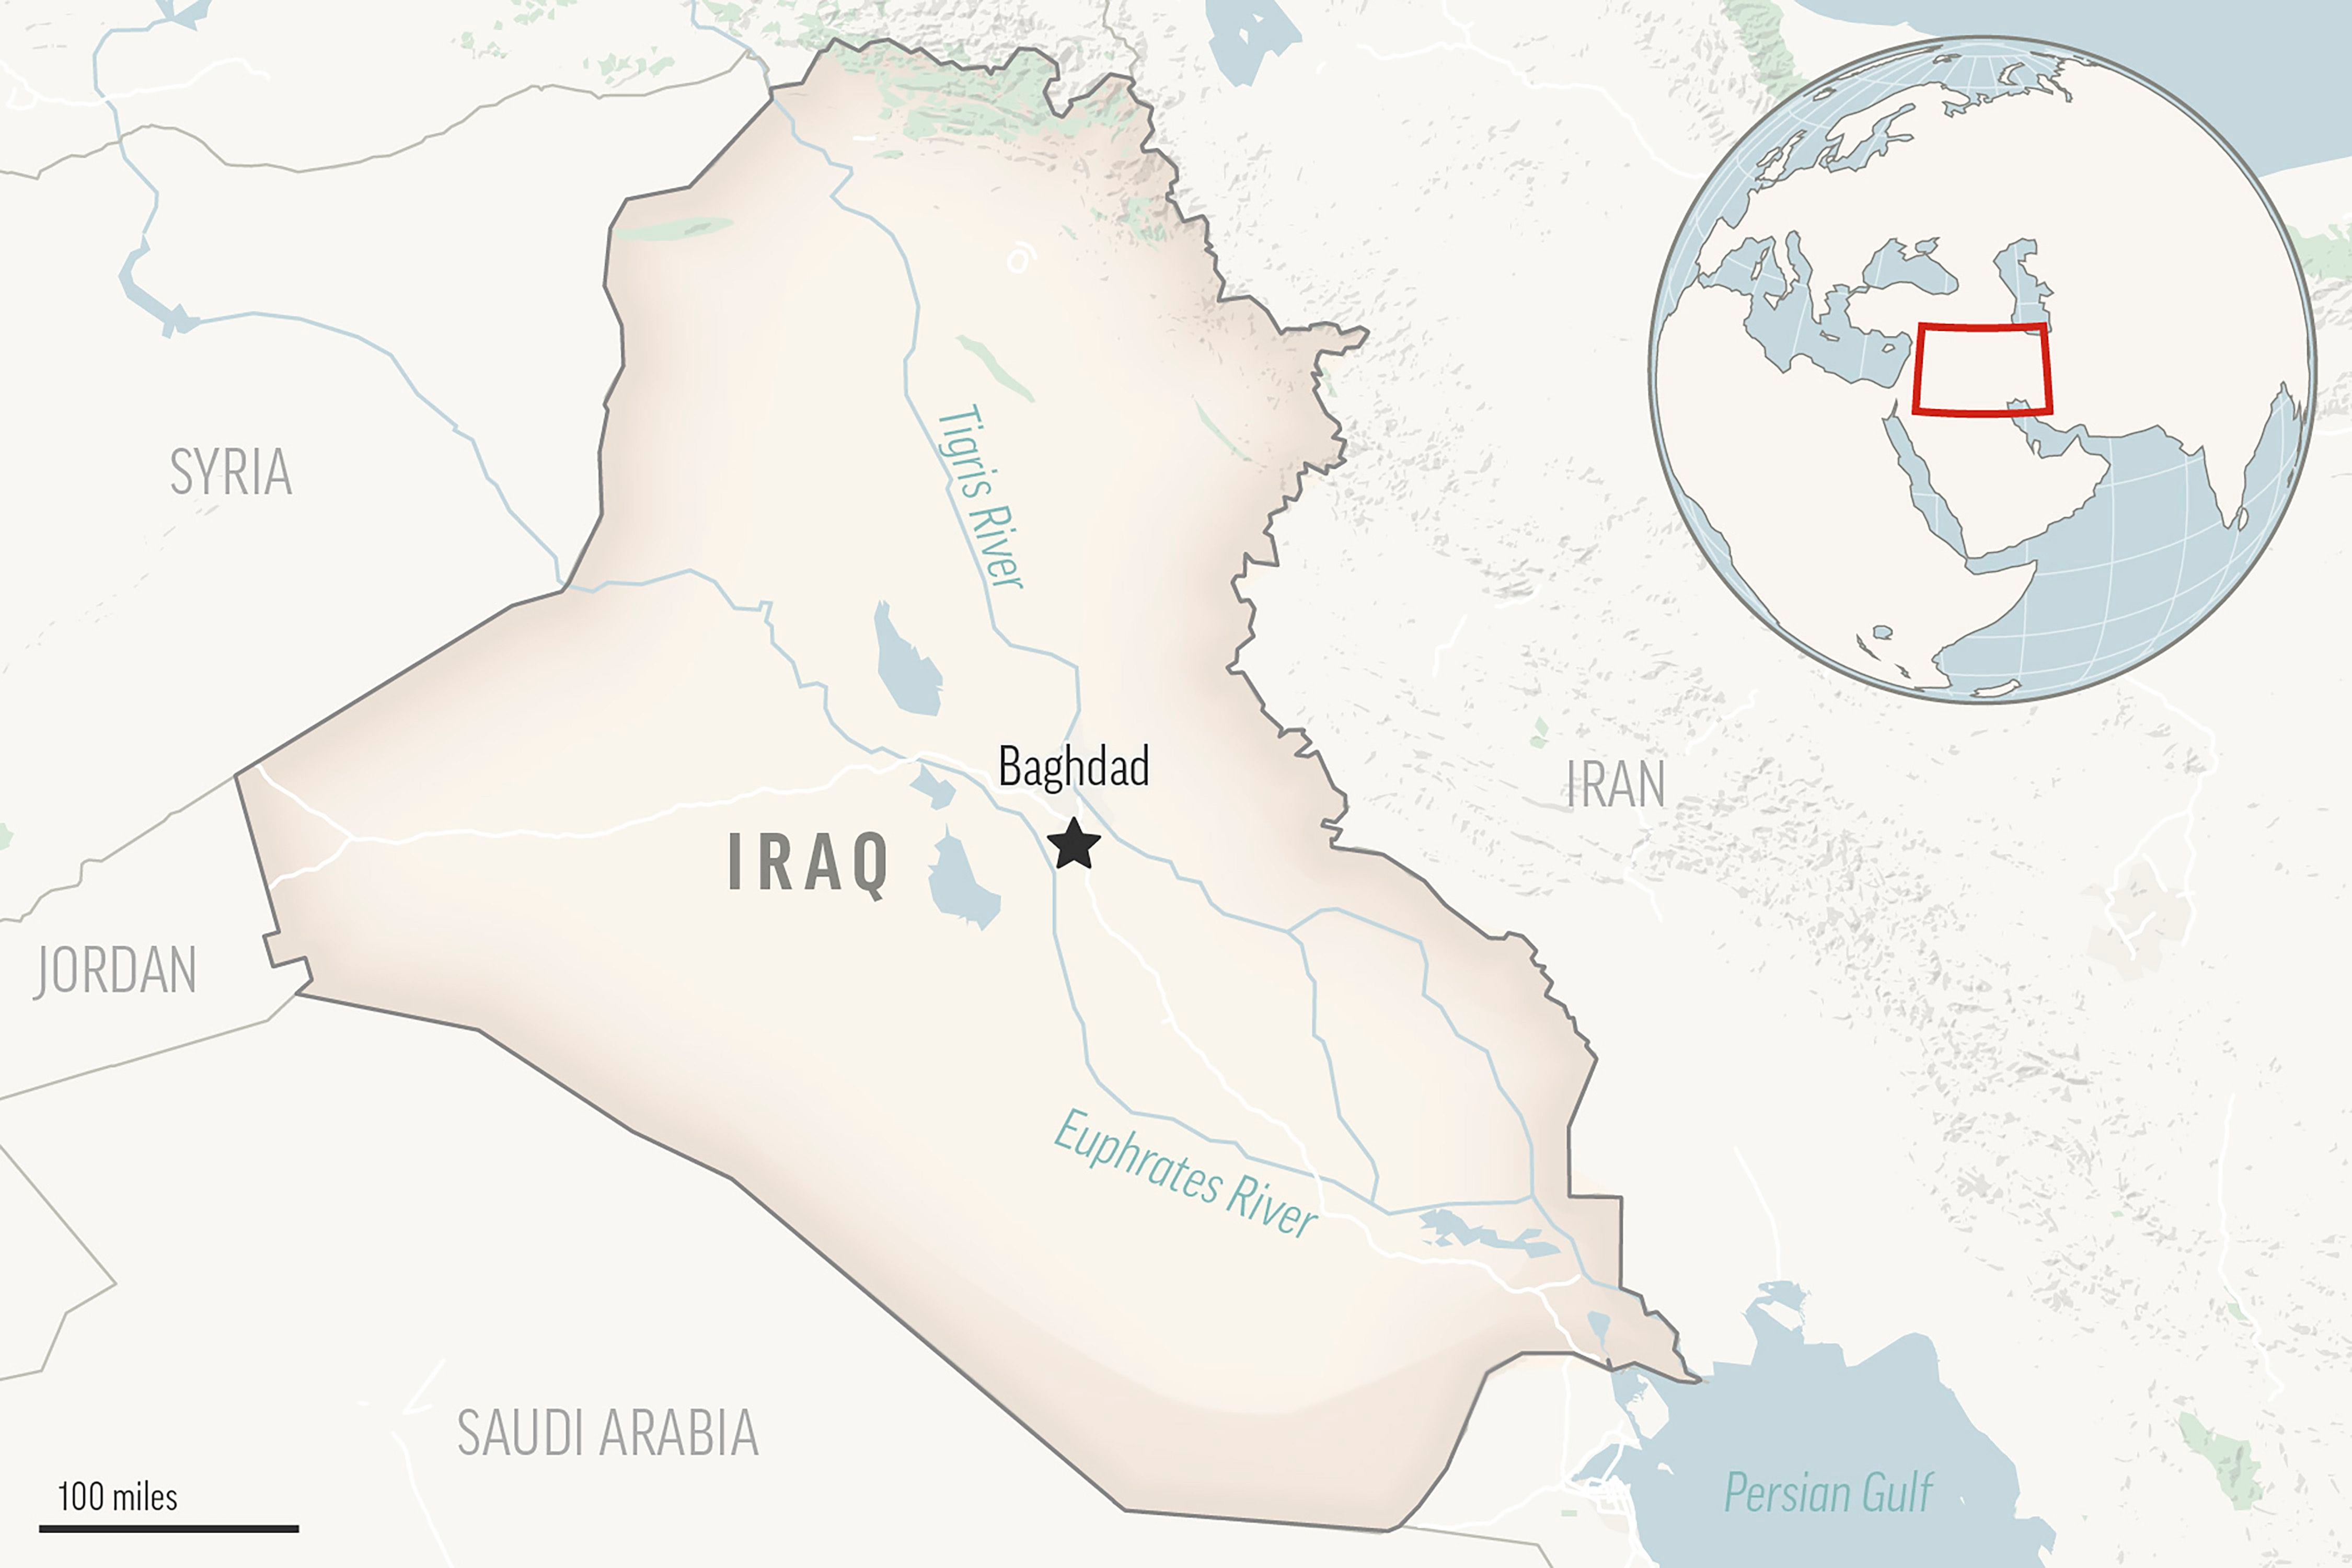 Turkmenistan and Iran sign deal to supply gas to Iraq. Iran will build pipeline to aid delivery thumbnail